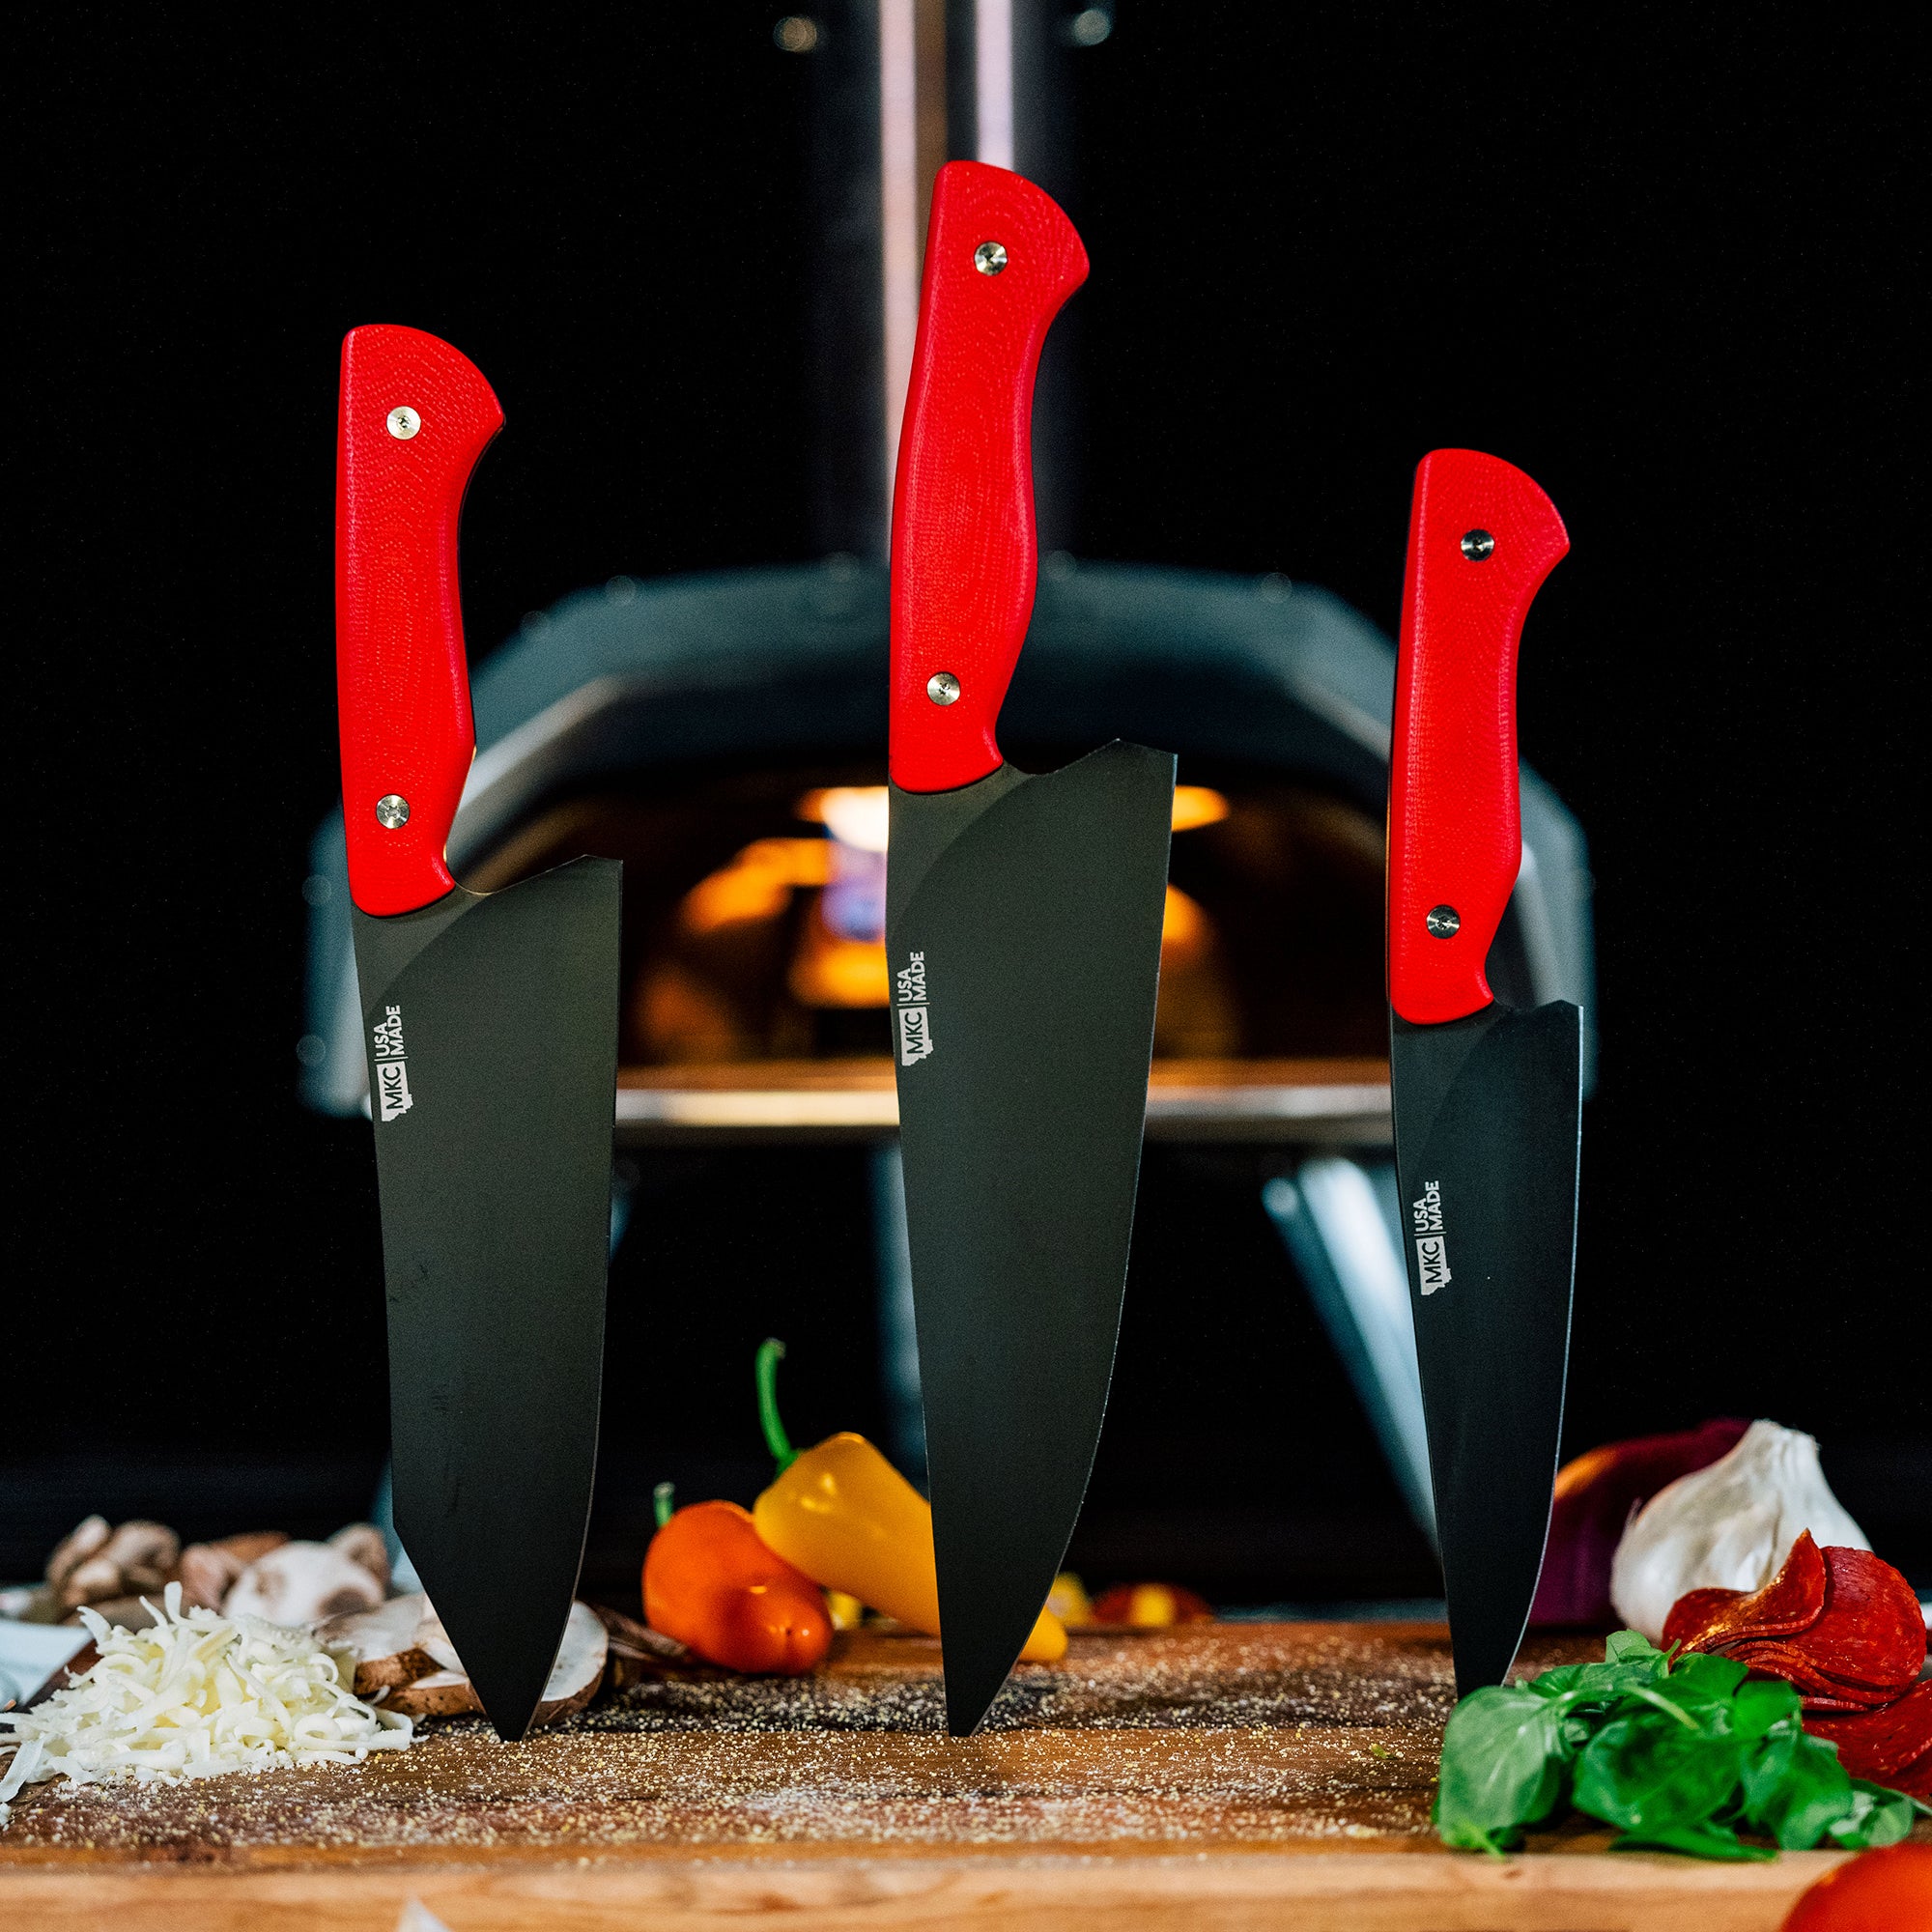 Made In's Restaurant Quality Knives Come in a Brand New Color